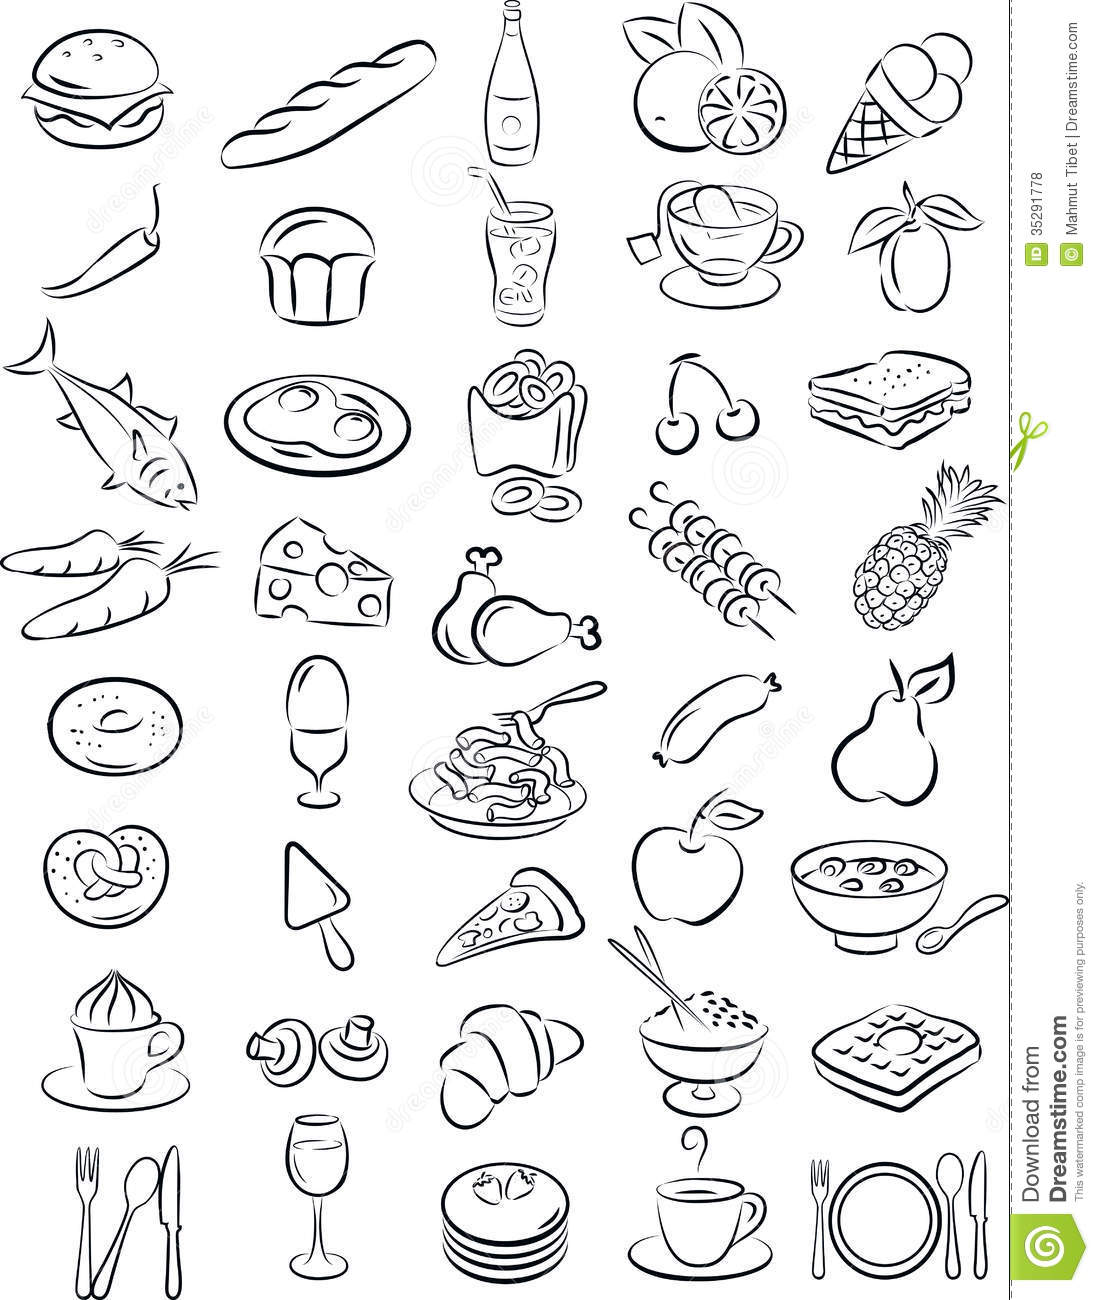 14+ Black And White Food Clipart - Preview : Foods | HDClipartAll